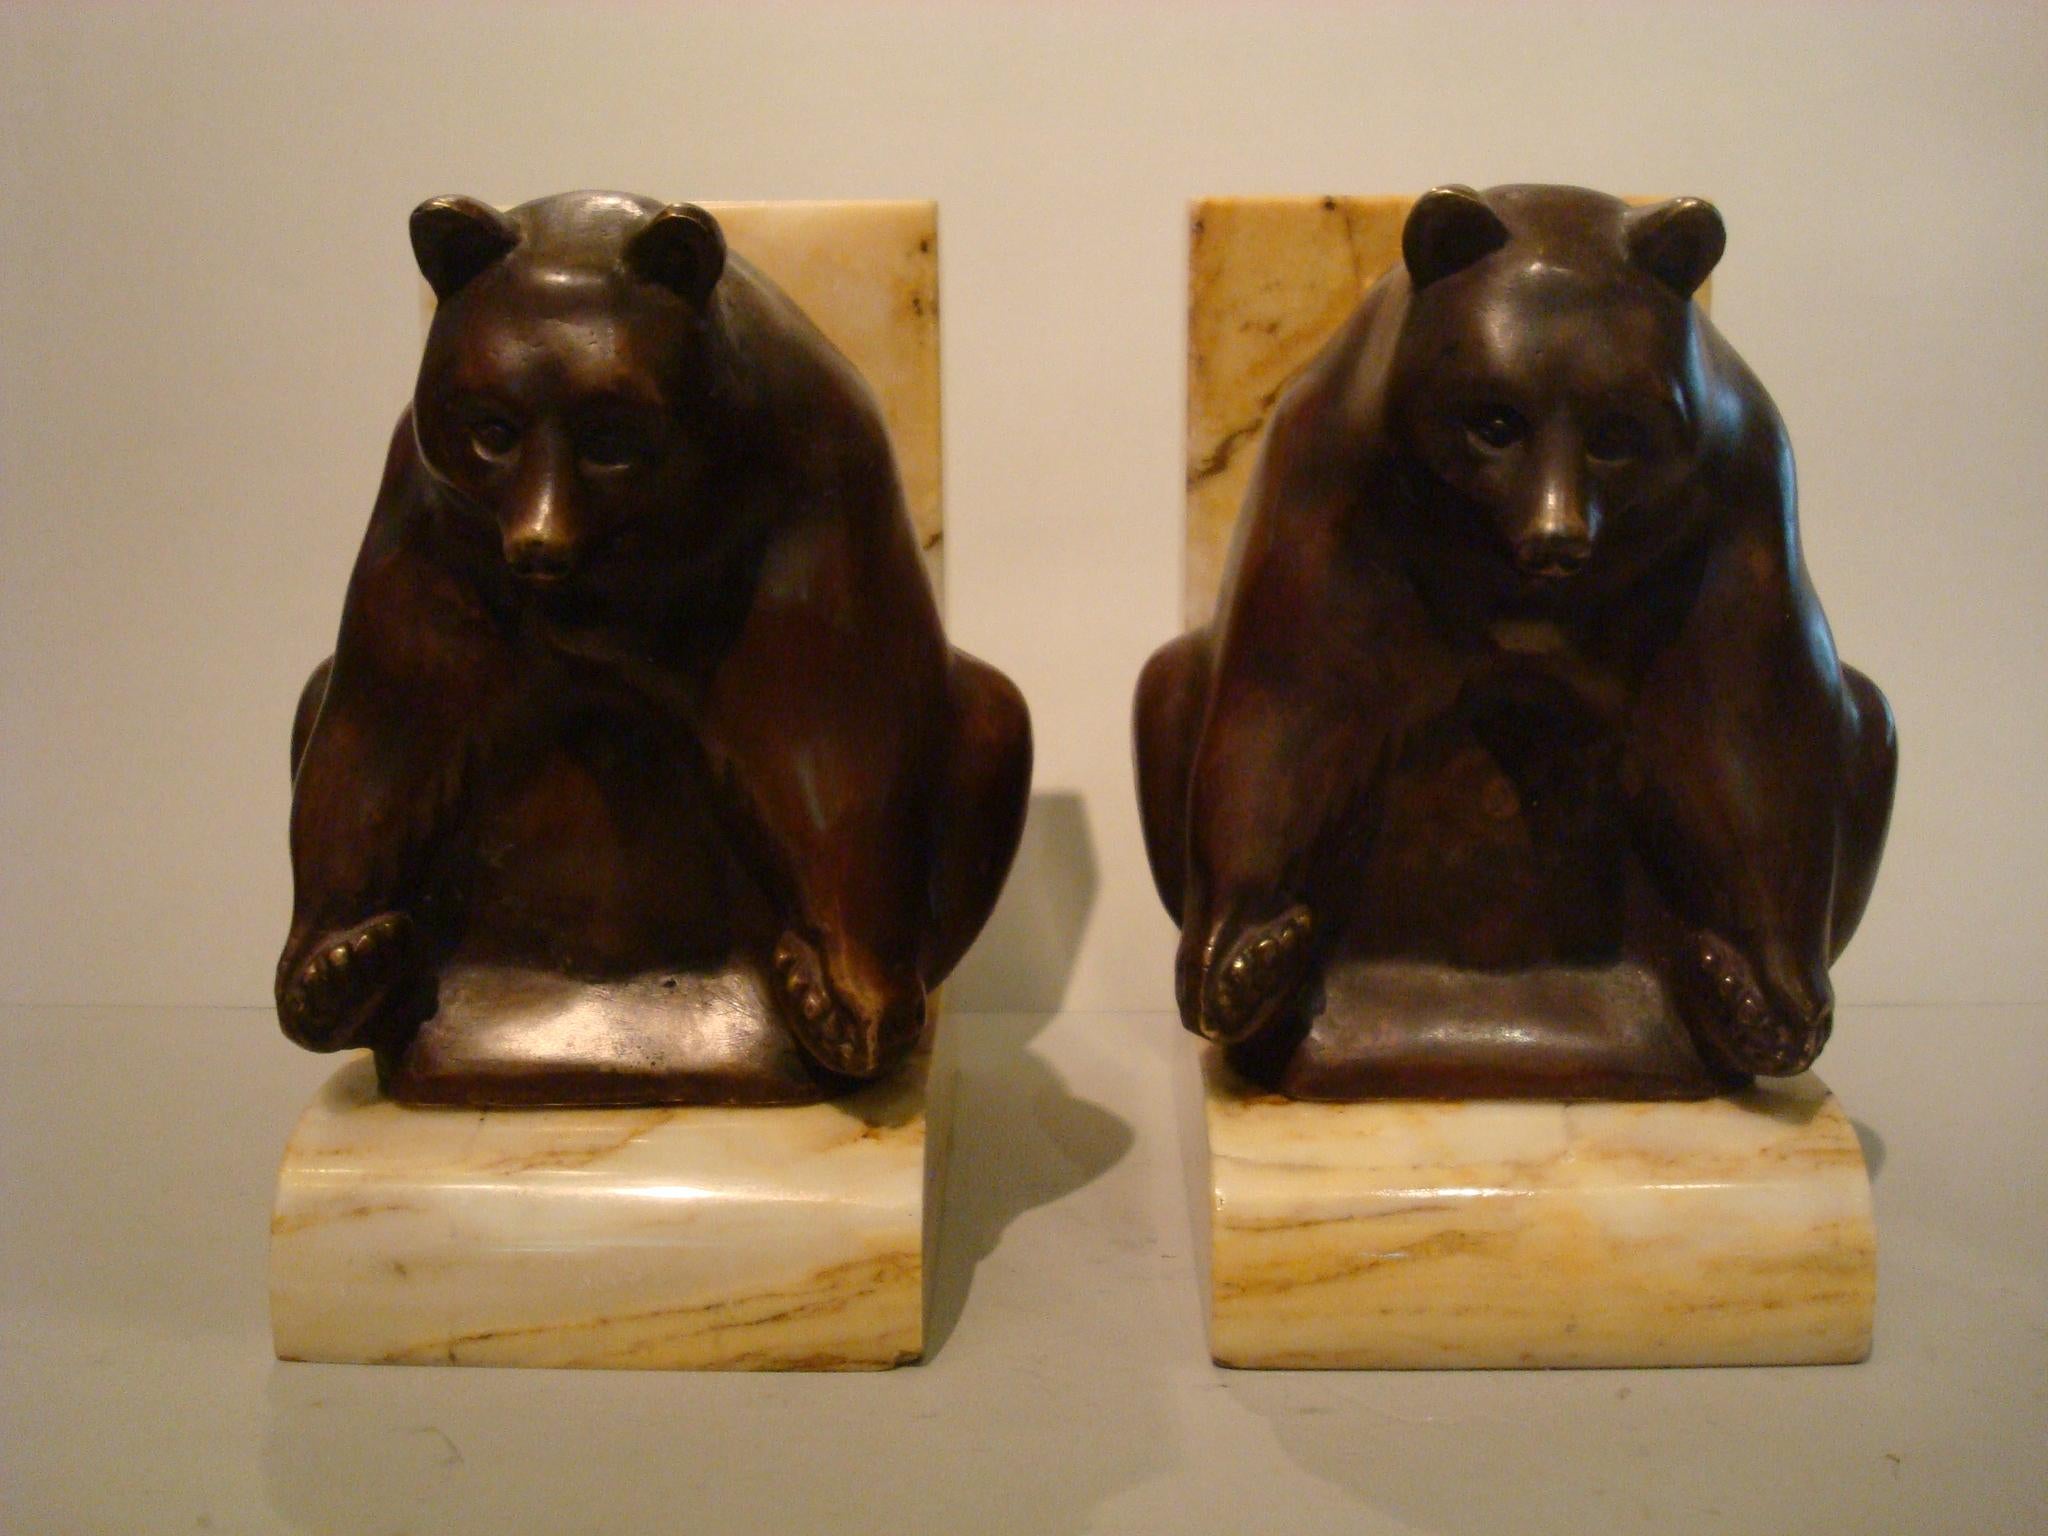 Art Deco Grisby bear bronze bookends, France, circa 1925.
Mounted over brown marble base. signed Ch. Soudant, and foundry marks Susse freress ed. Paris. Very Nice sculpture of a playing bear.